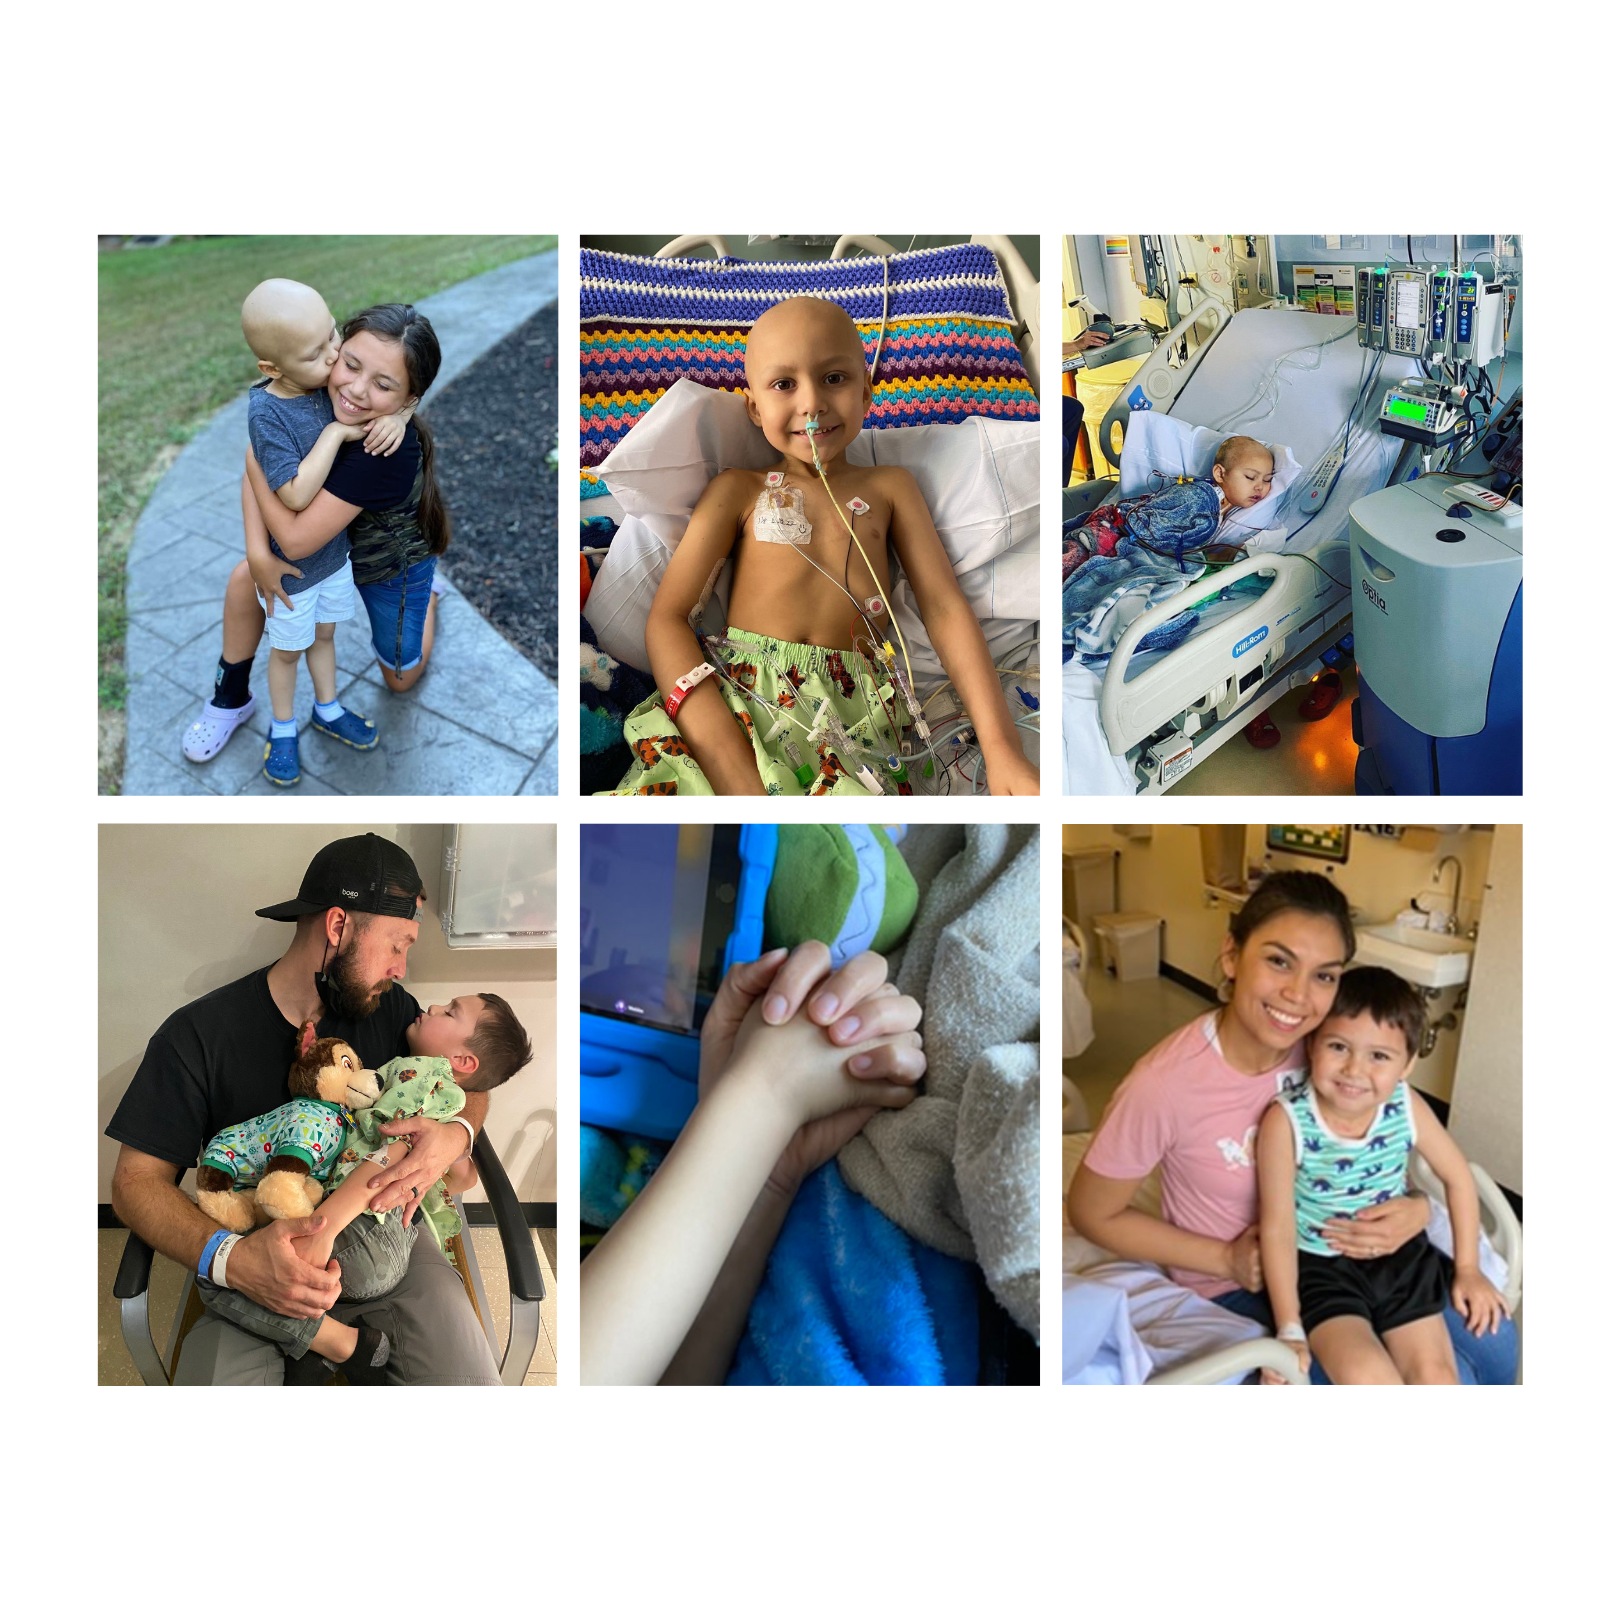 collage of photos showing Levi and his family in the hospital during his treatment